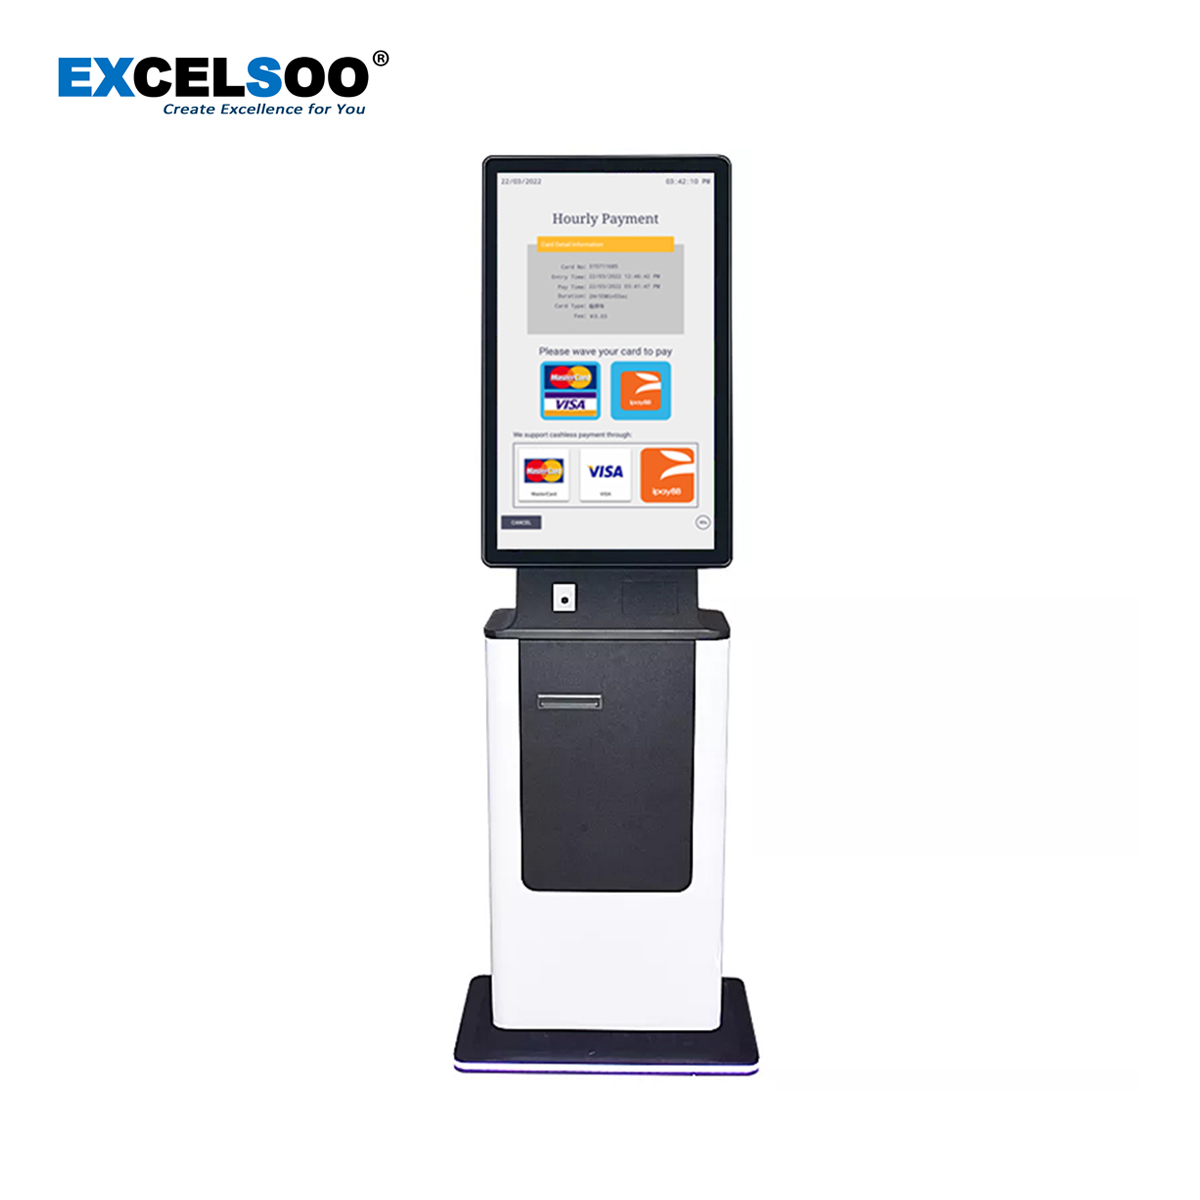 Excelsoo Pay on Foot Auto Payment Kiosk APS-E6 for Cashless Parking